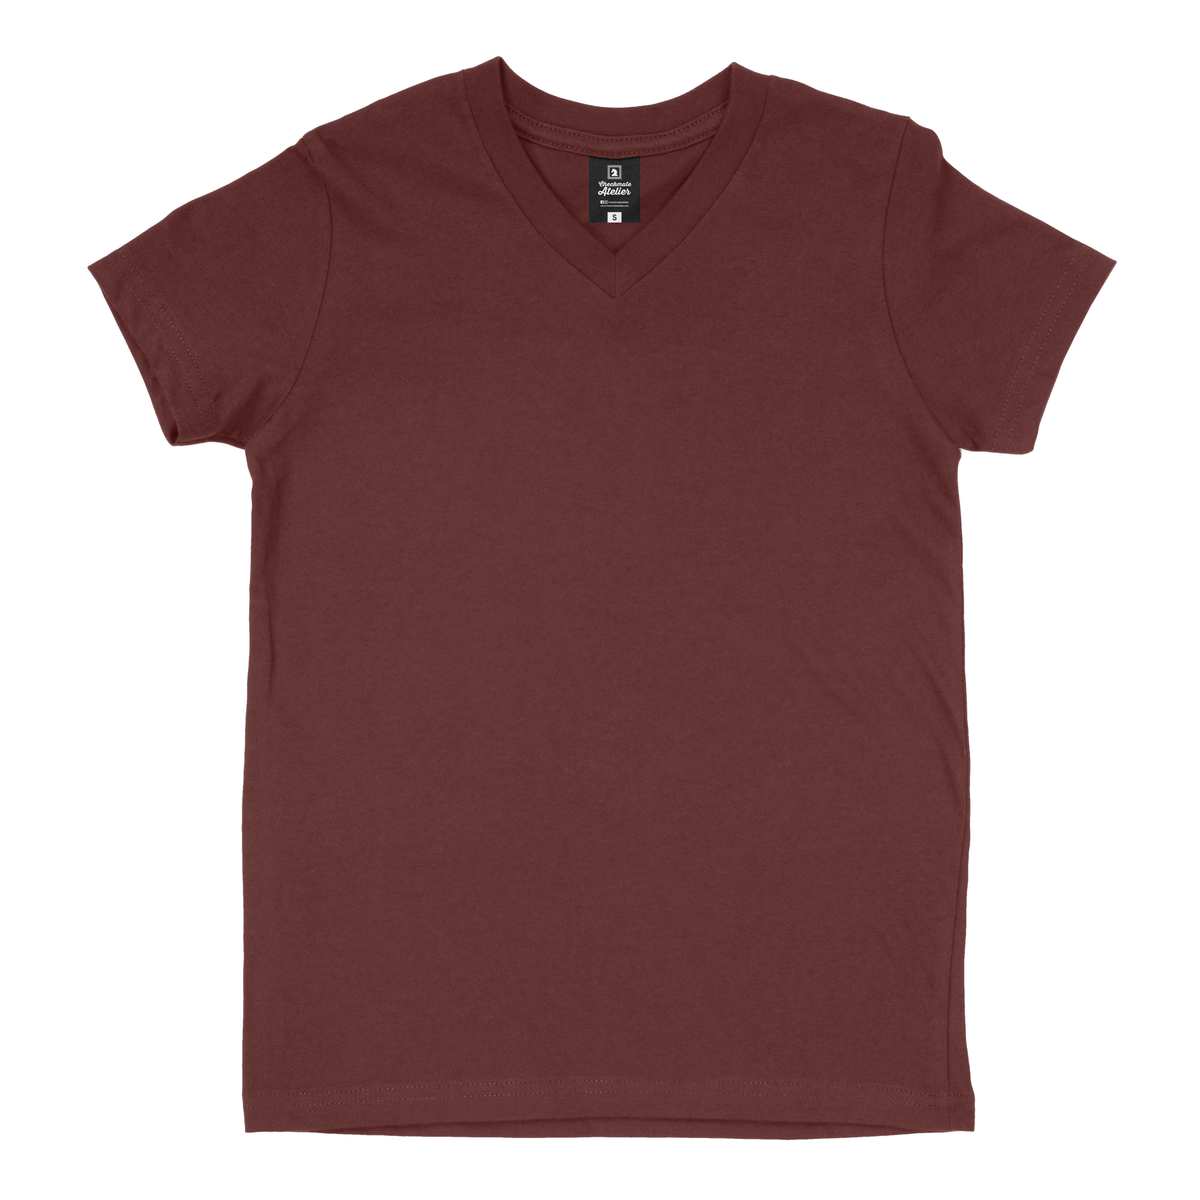 Maroon V-Neck T-Shirt - Shop Now - Checkmate Atelier